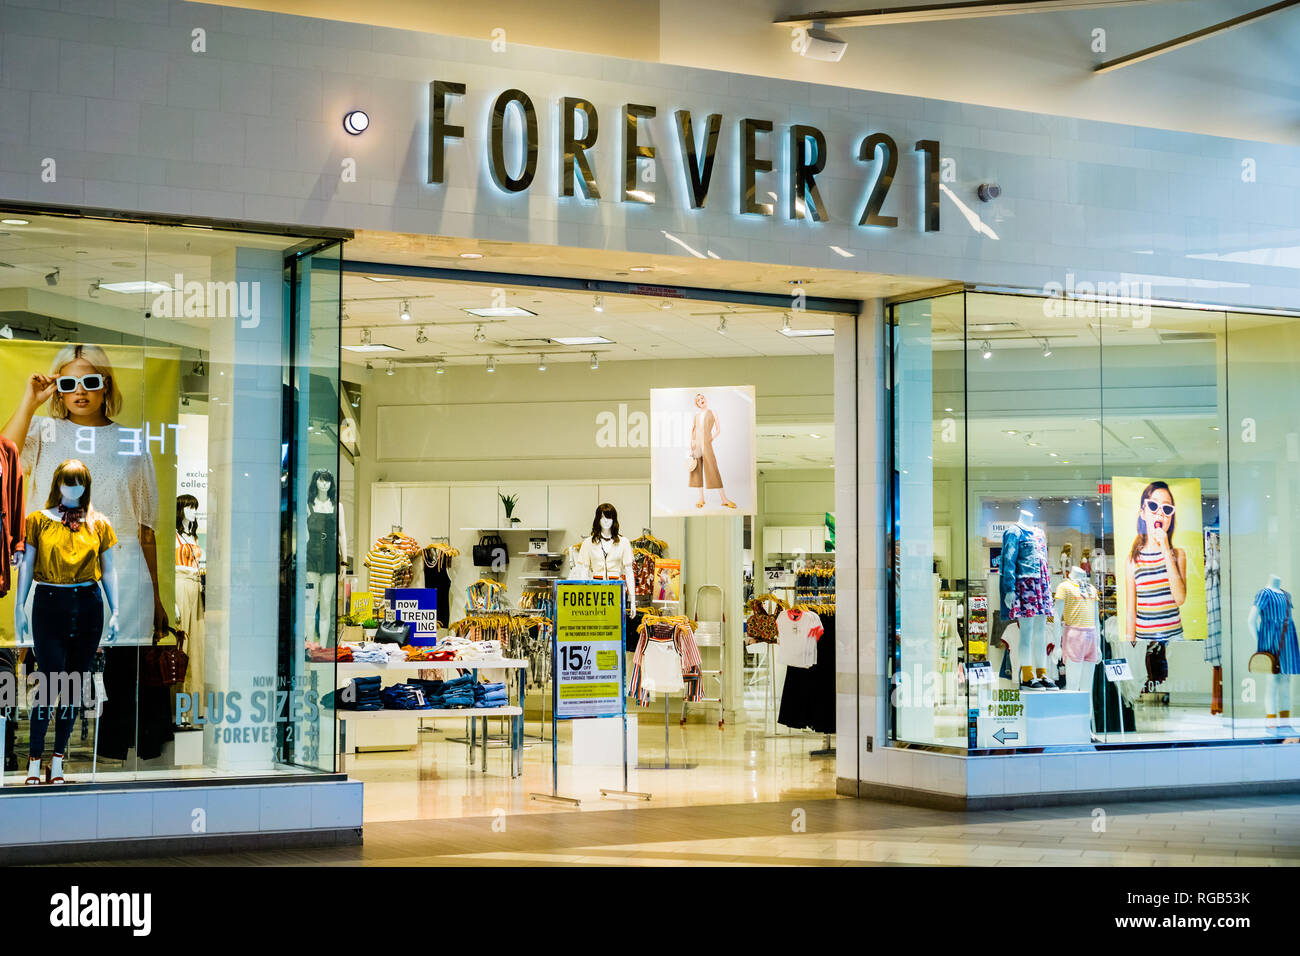 Forever 21 store editorial image. Image of inside, retail - 95366705